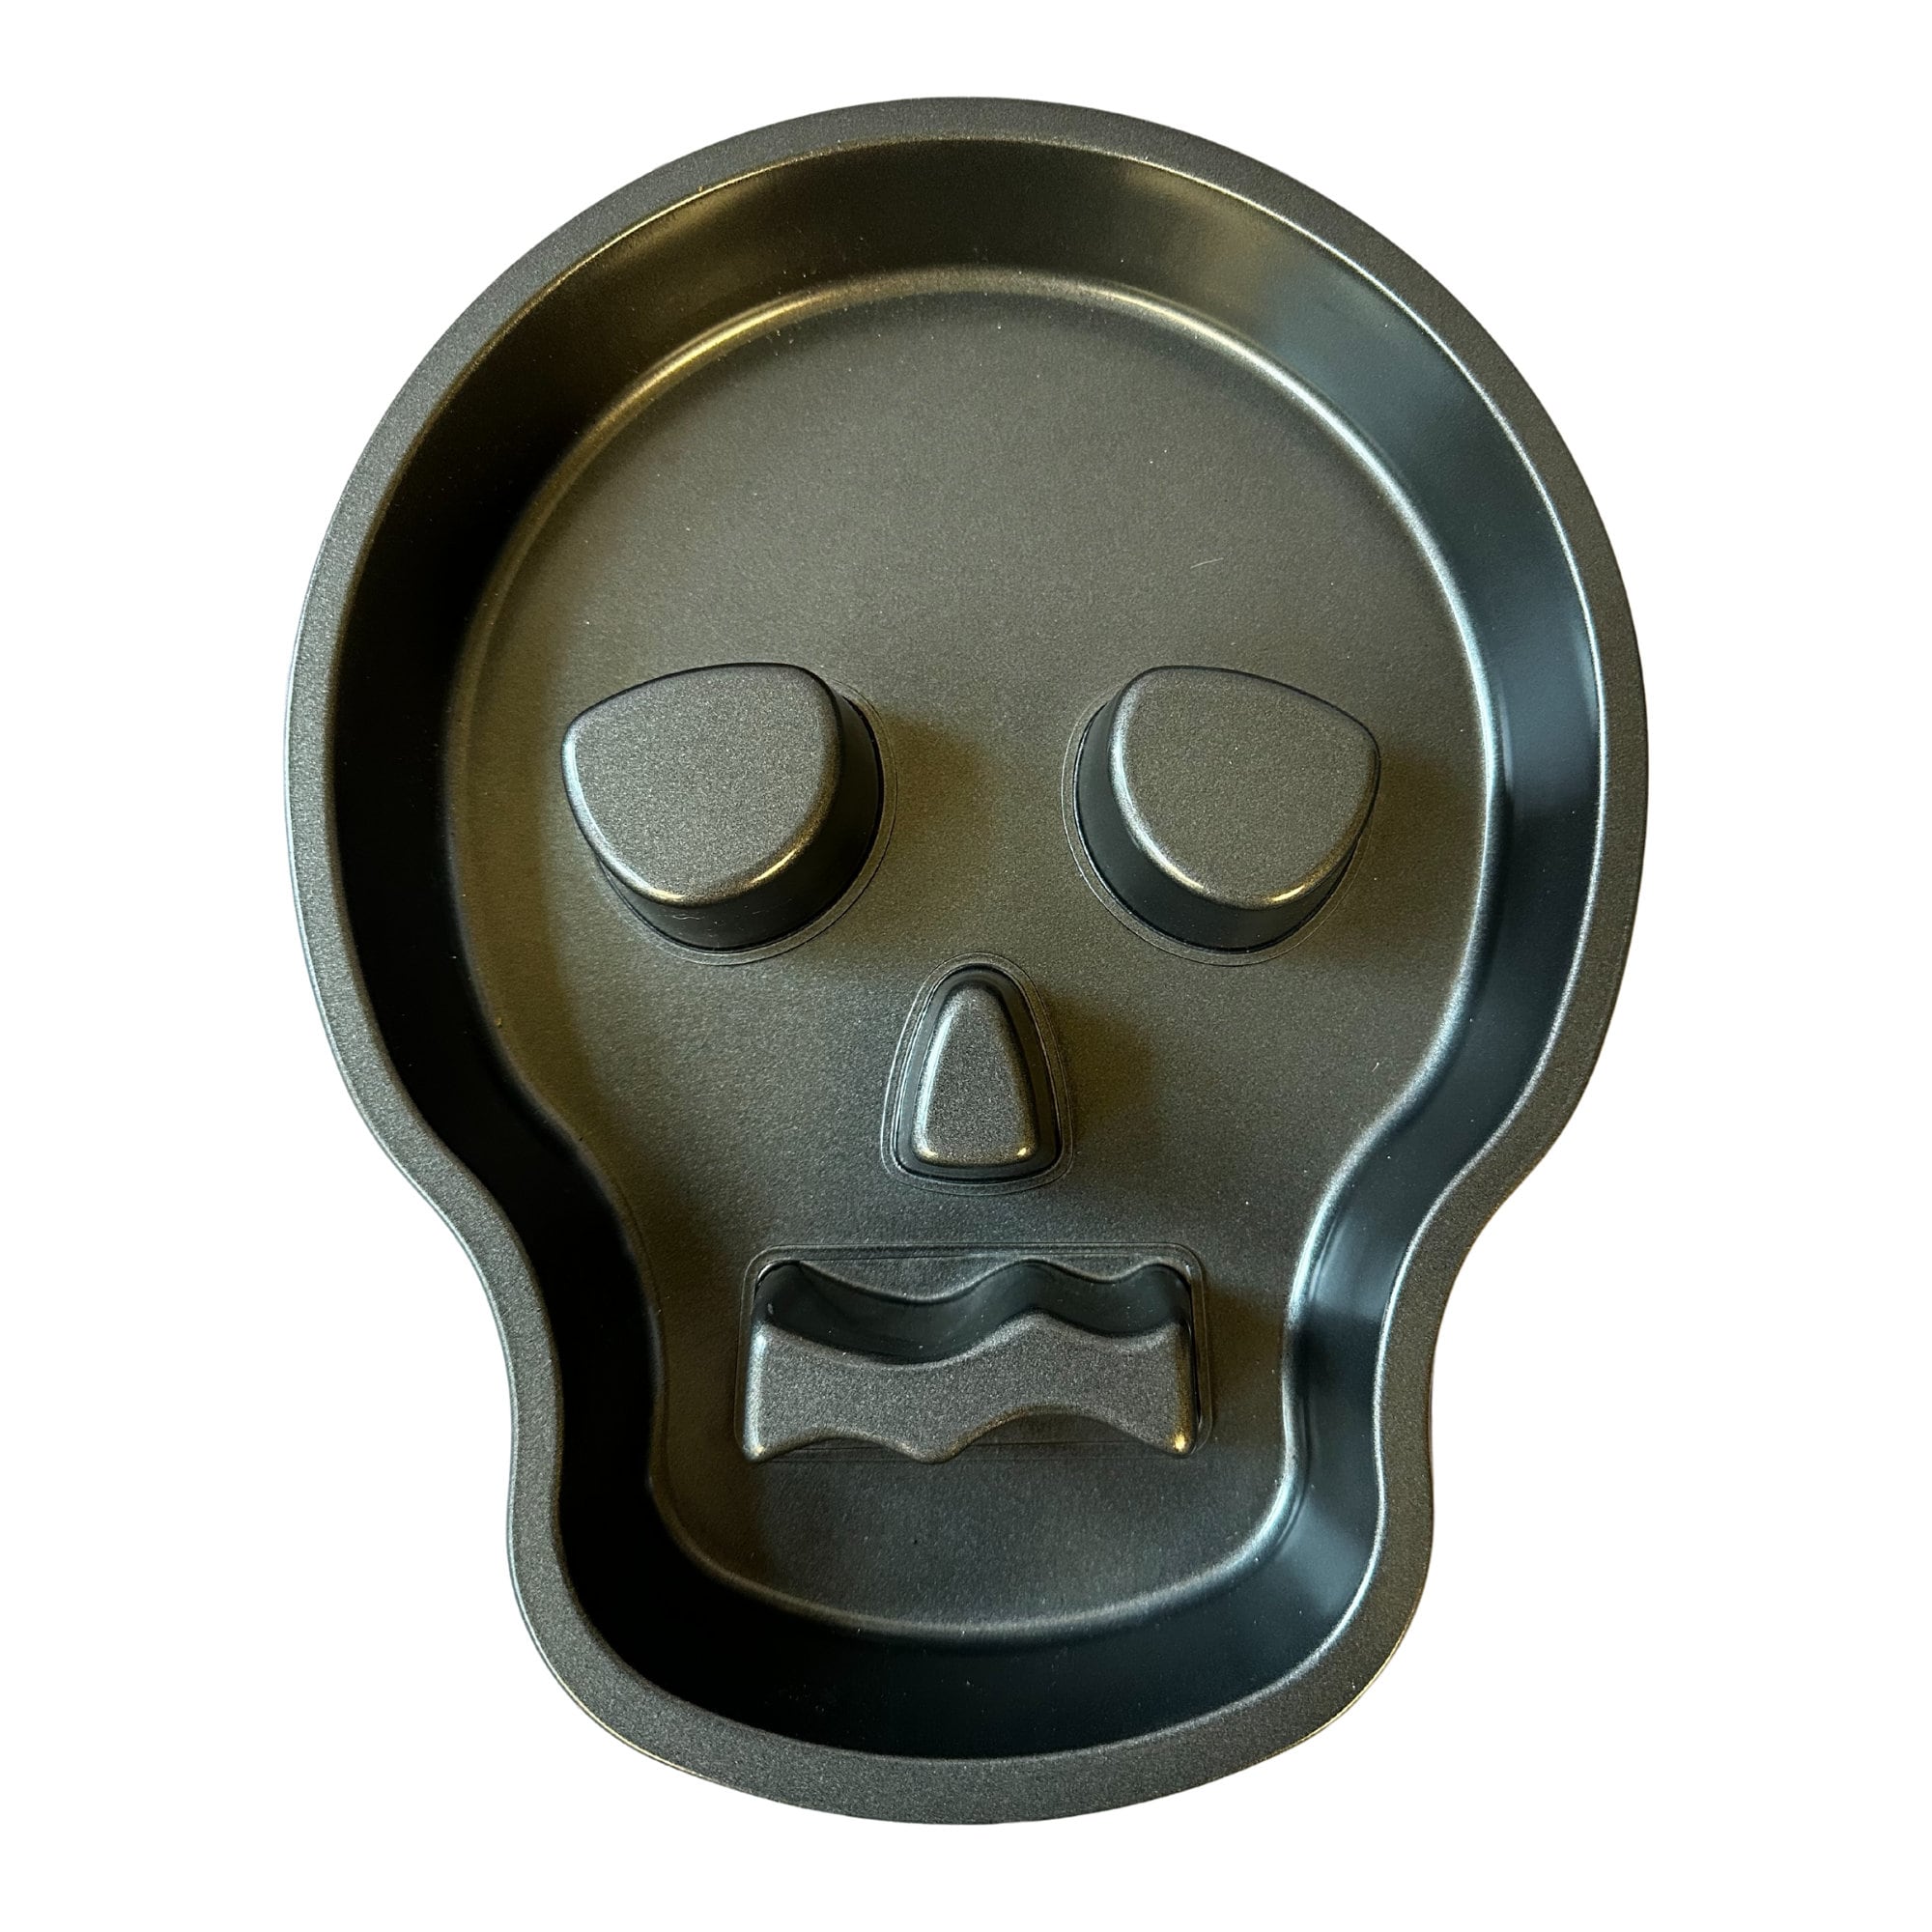 Skull Cake Mold Pan, Great Housewarming Gift for Goths or Witches, Use for  Halloween or to Make Spooky Cakes All Year Long 